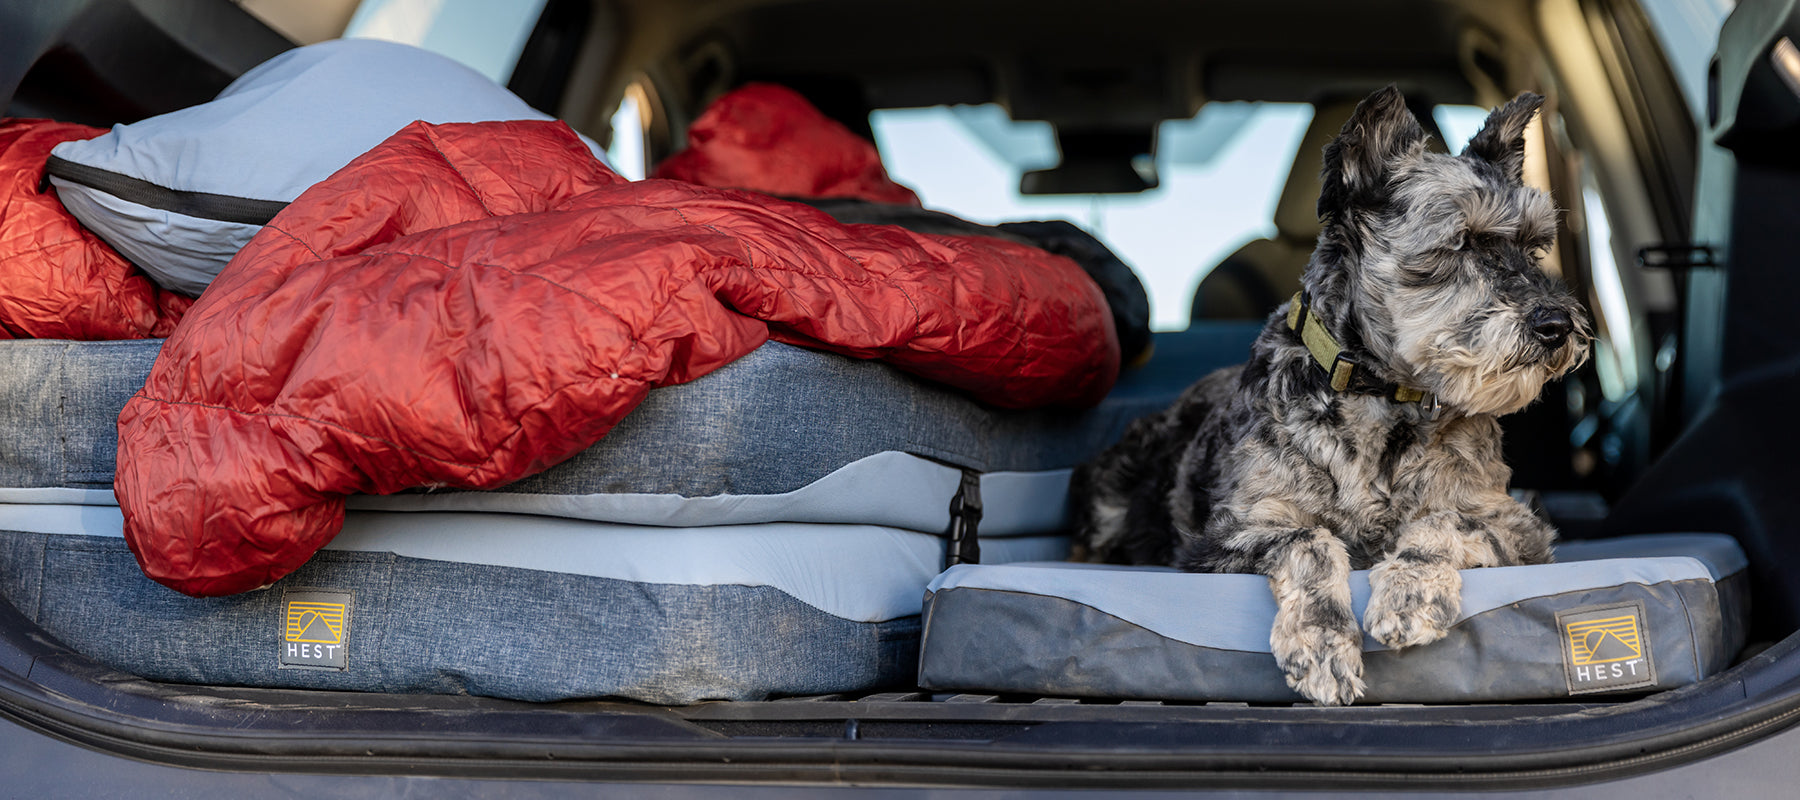 5 Best dog friendly camping sites near Seattle